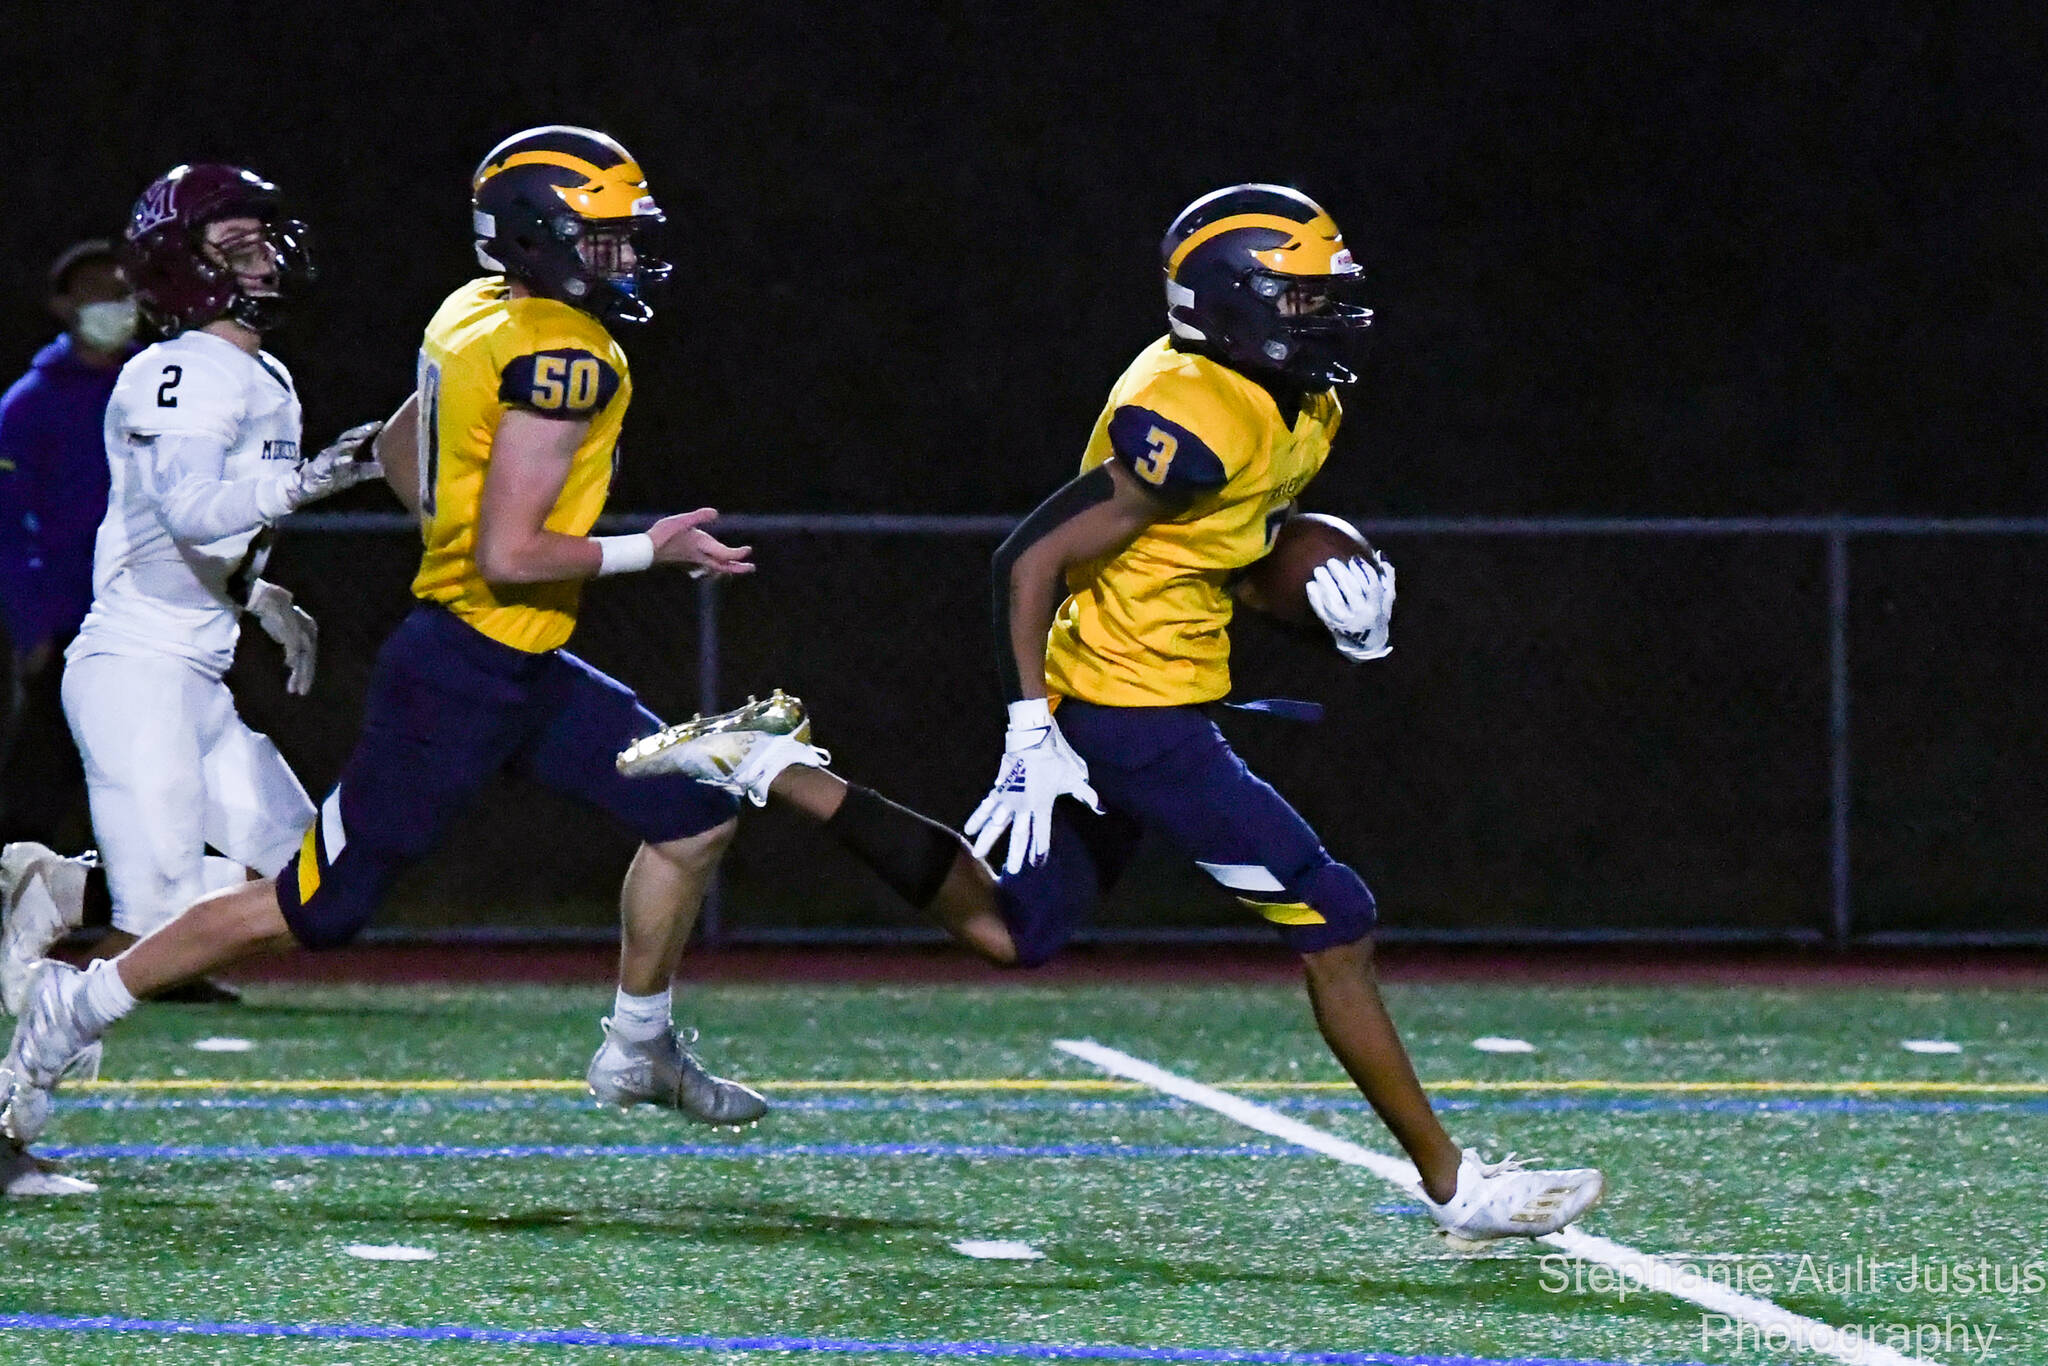 Bellevue’s Ishaan Daniels scores one of his touchdowns while Bellevue’s Leland Ryals and Mercer Island’s Nicholas Chatalas follow. Photo courtesy of Stephanie Ault Justus